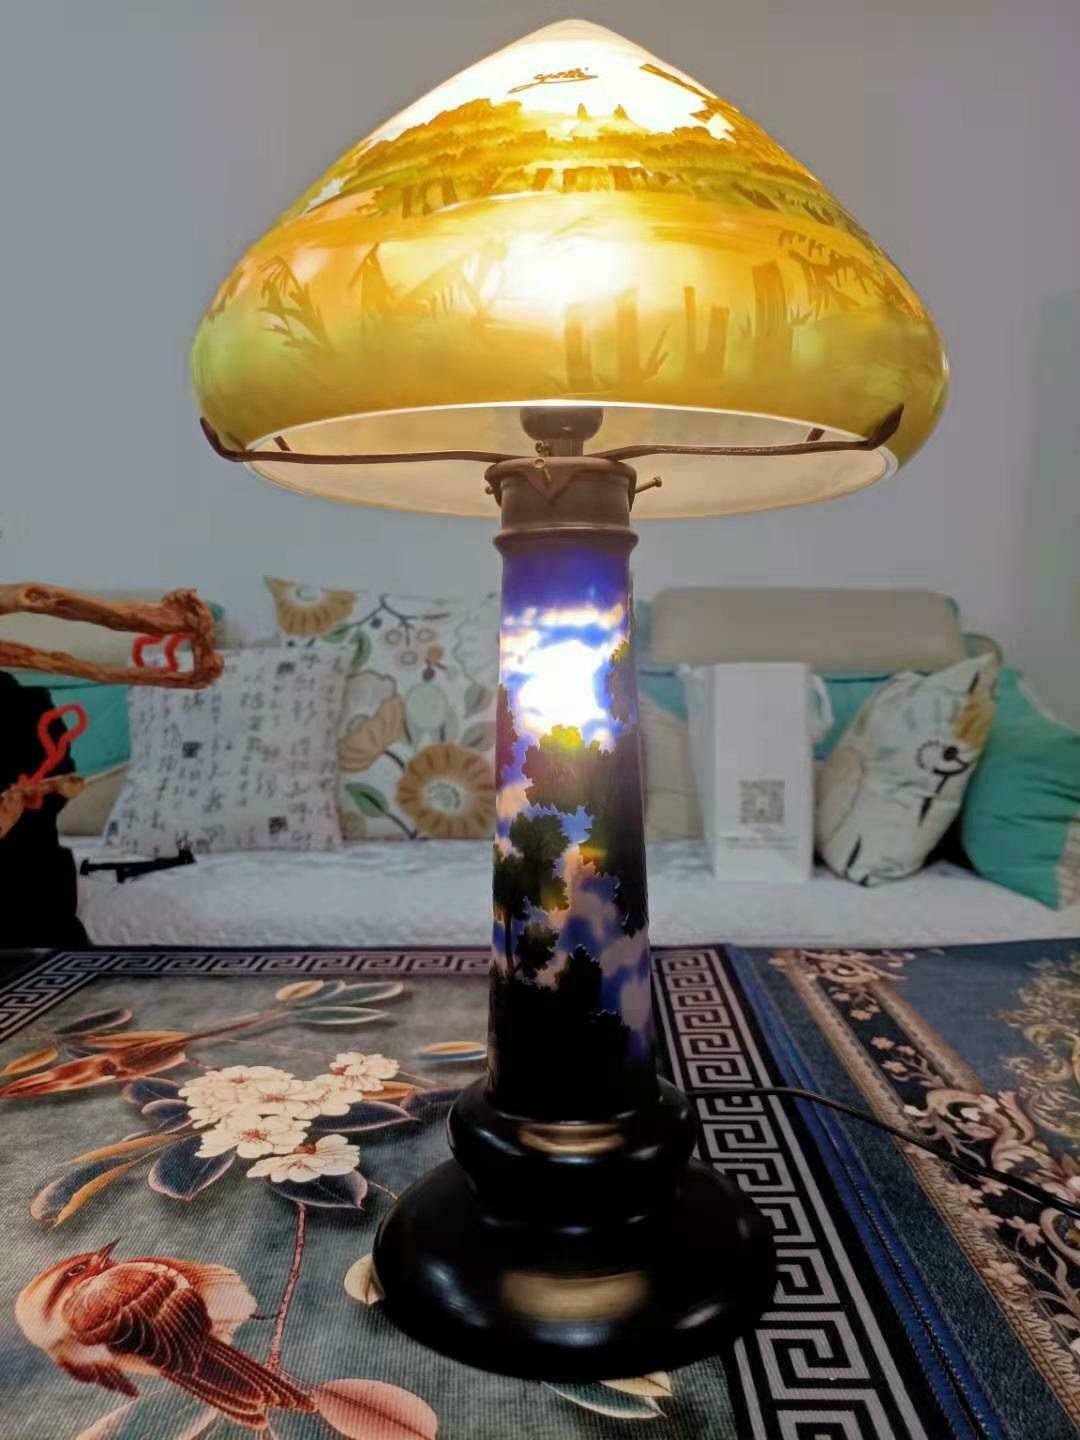 Lampe Verre de Style Galle/Lamp Glass After Galle